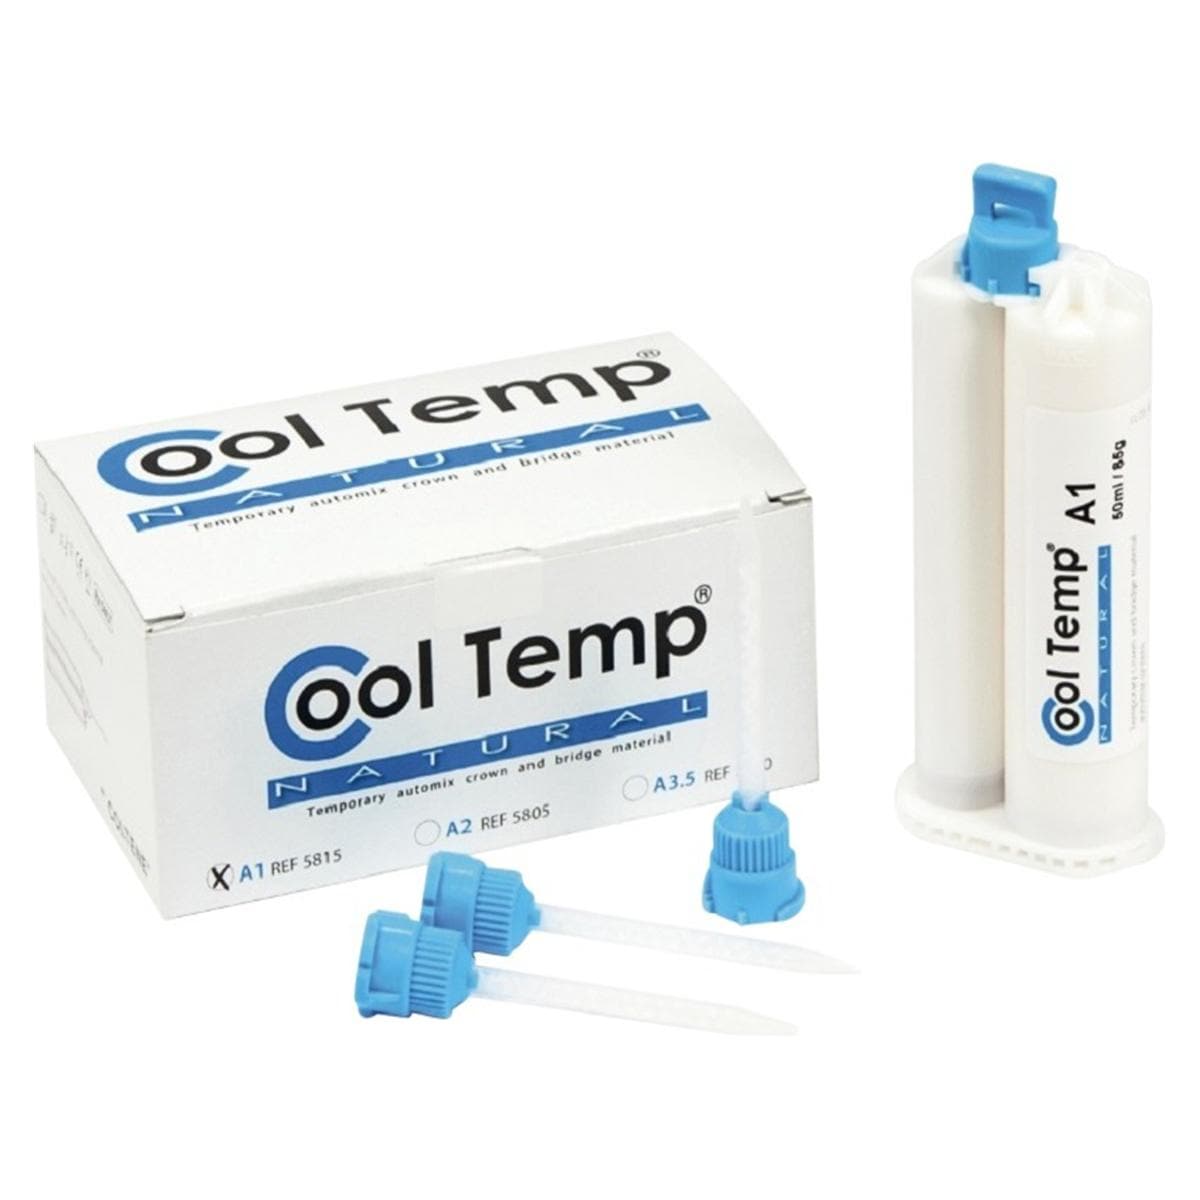 Coltene Cool Temp Natural Automix Temporary Crown and Bridge Material - 50 mL - 10 Mixing Tips